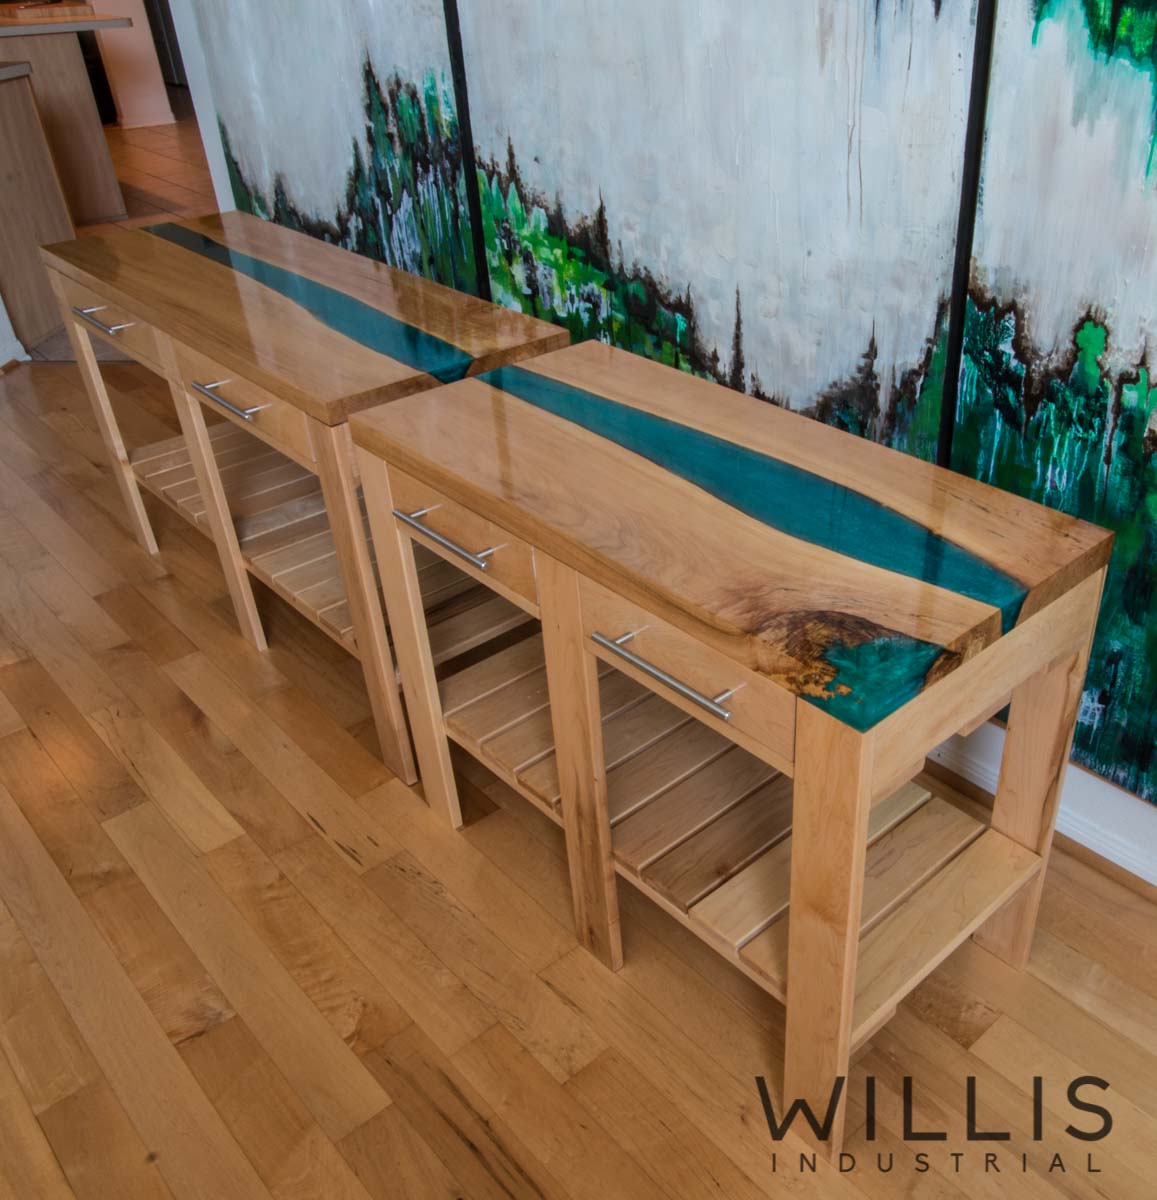 Willis Industrial Furniture | Rustic, Modern Furniture | Maple Framed Cabinet with Maple Slab Top